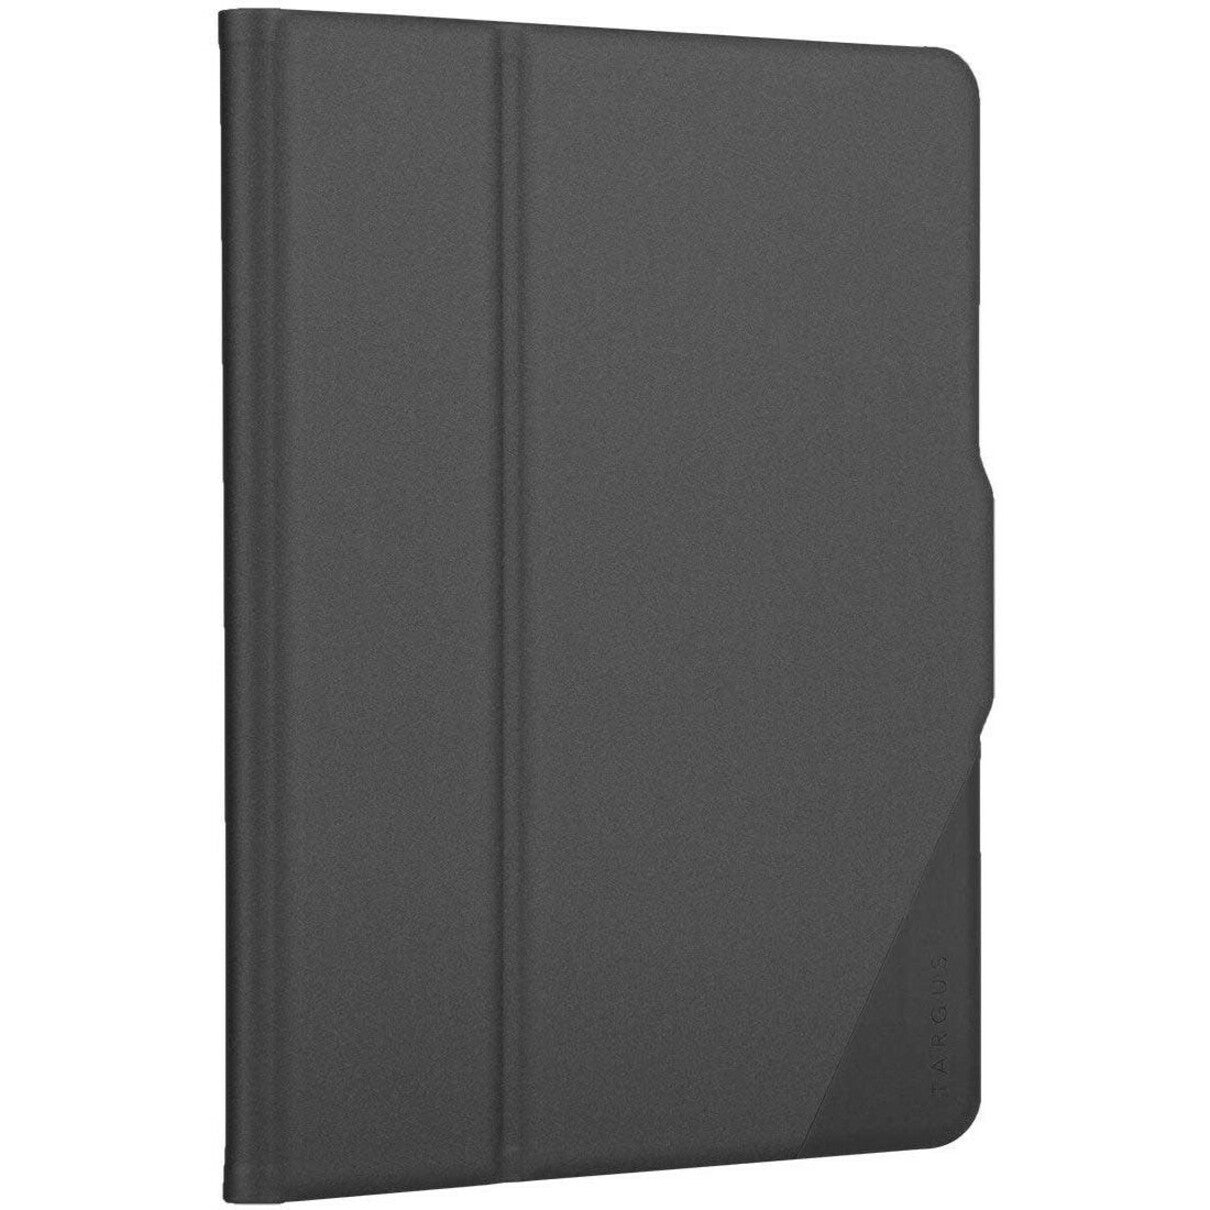 Targus THZ863GL VersaVu Case for iPad (9th, 8th, and 7th gen.) 10.2-inch, Black, Magnetic Closure, Drop Resistant